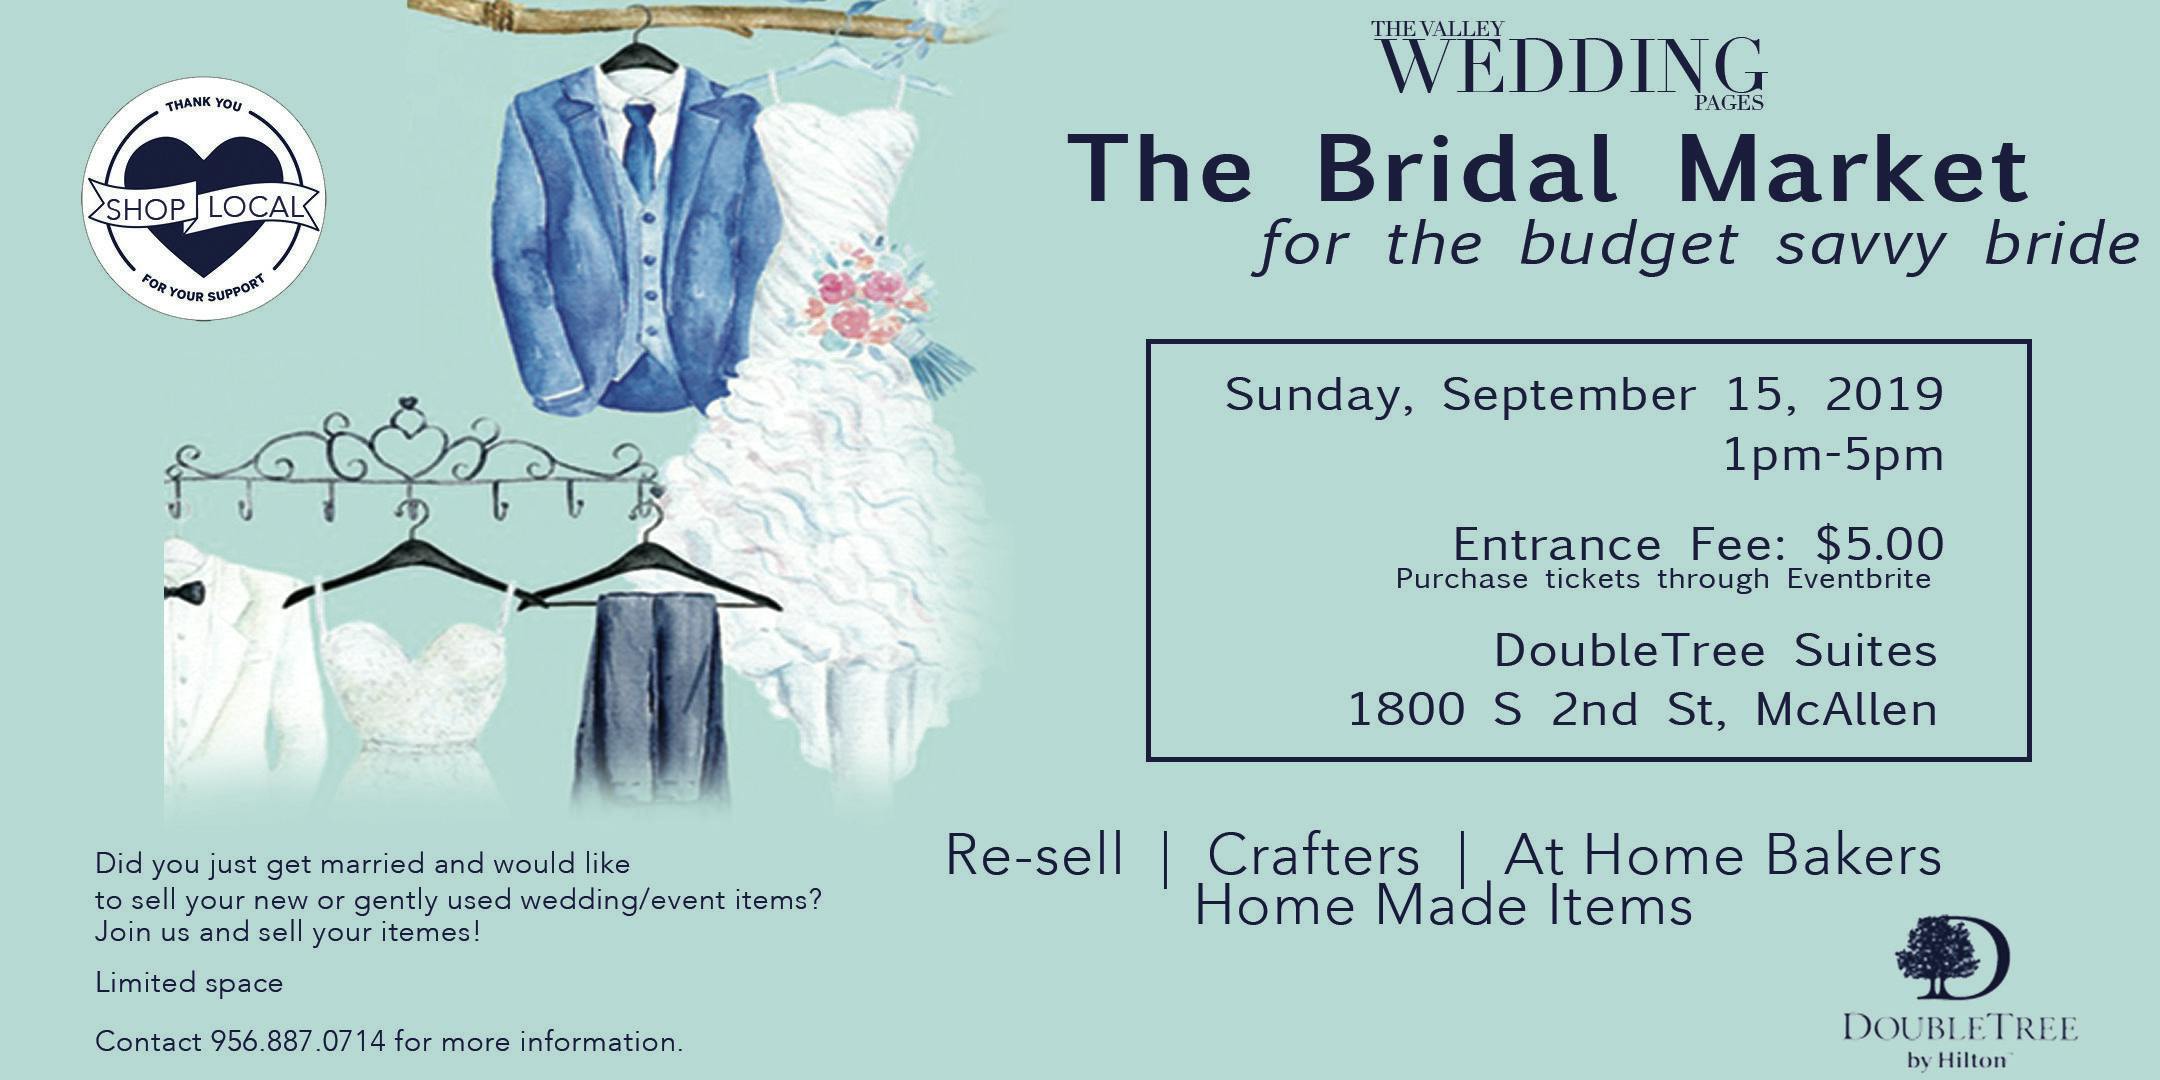 The Bridal Market: for the budget savvy bride